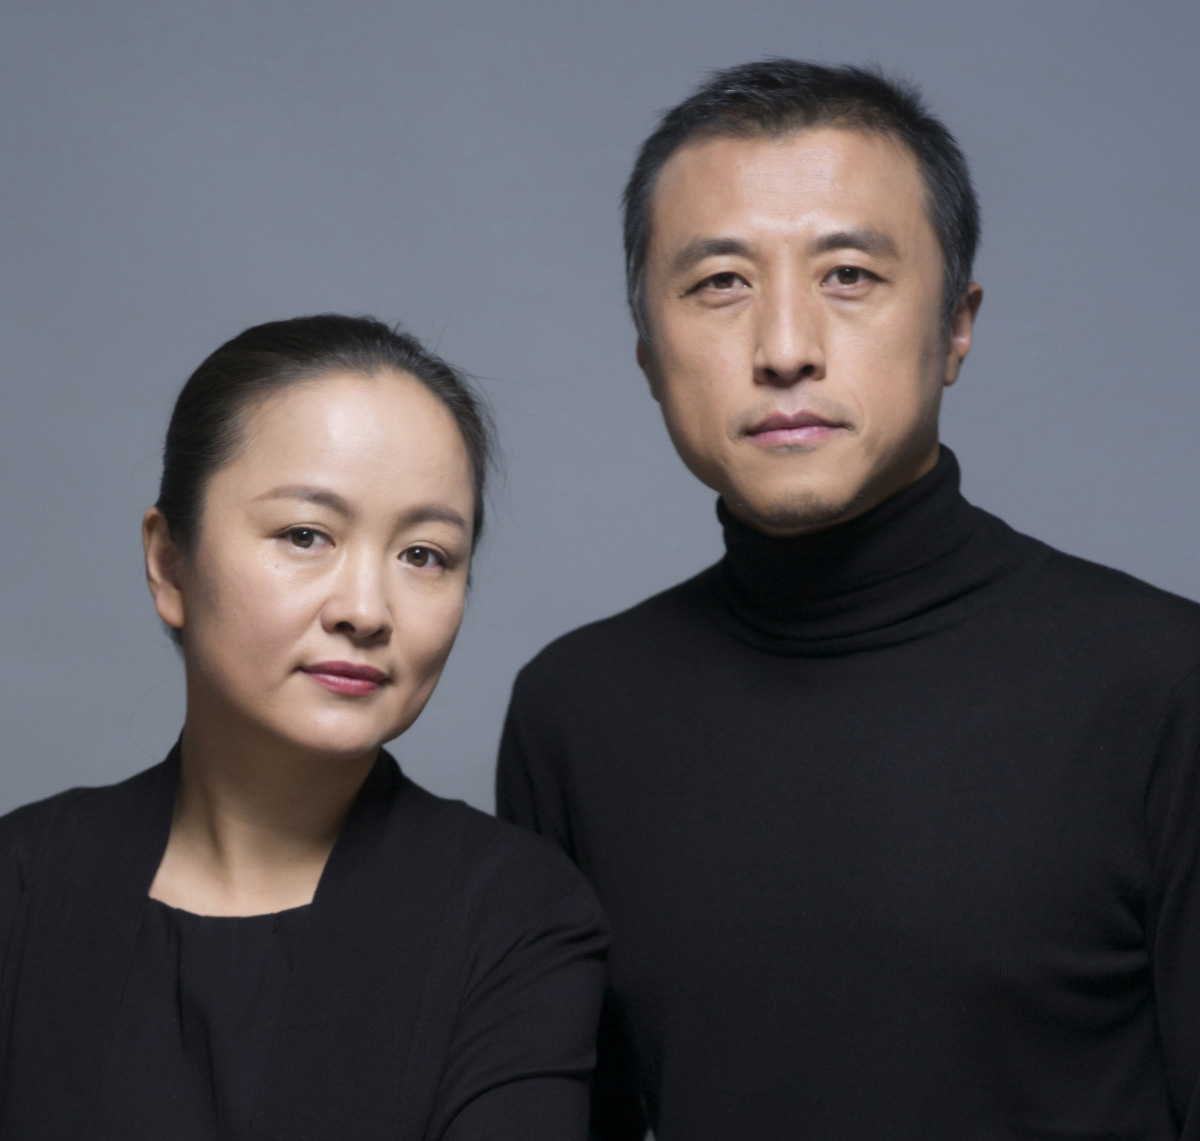 An Asian man and woman in black next to each other